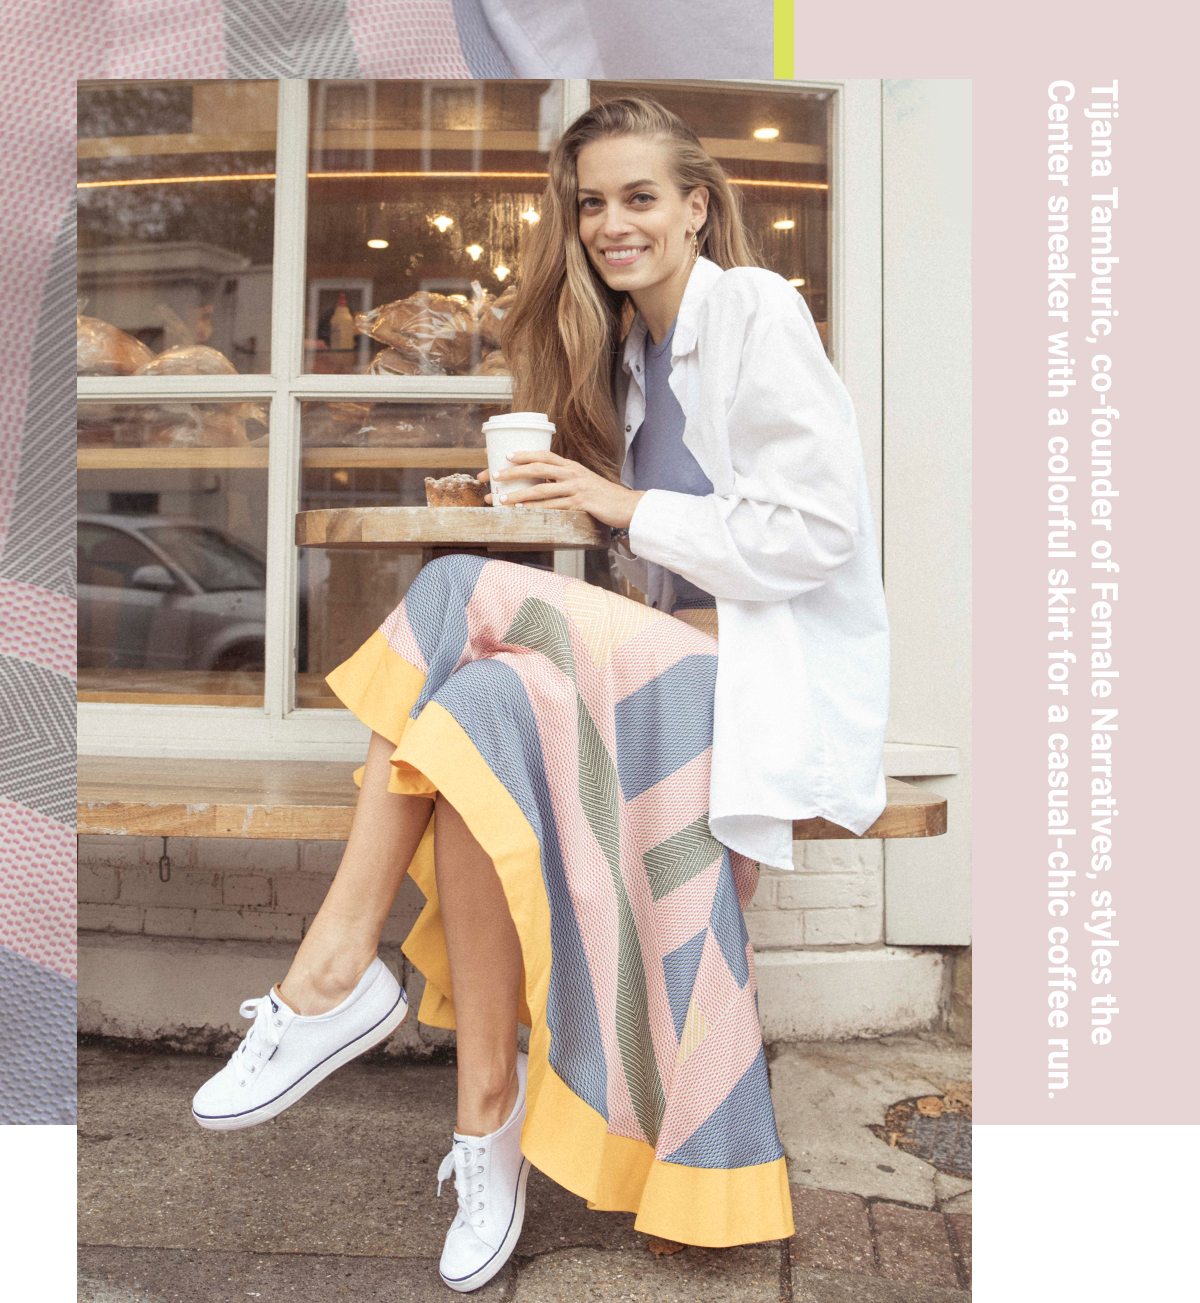 Tijana Tamburic, co-founder of Femal Narratives, styles the Center sneaker with a colorful skirt for a casual-chic coffee run.